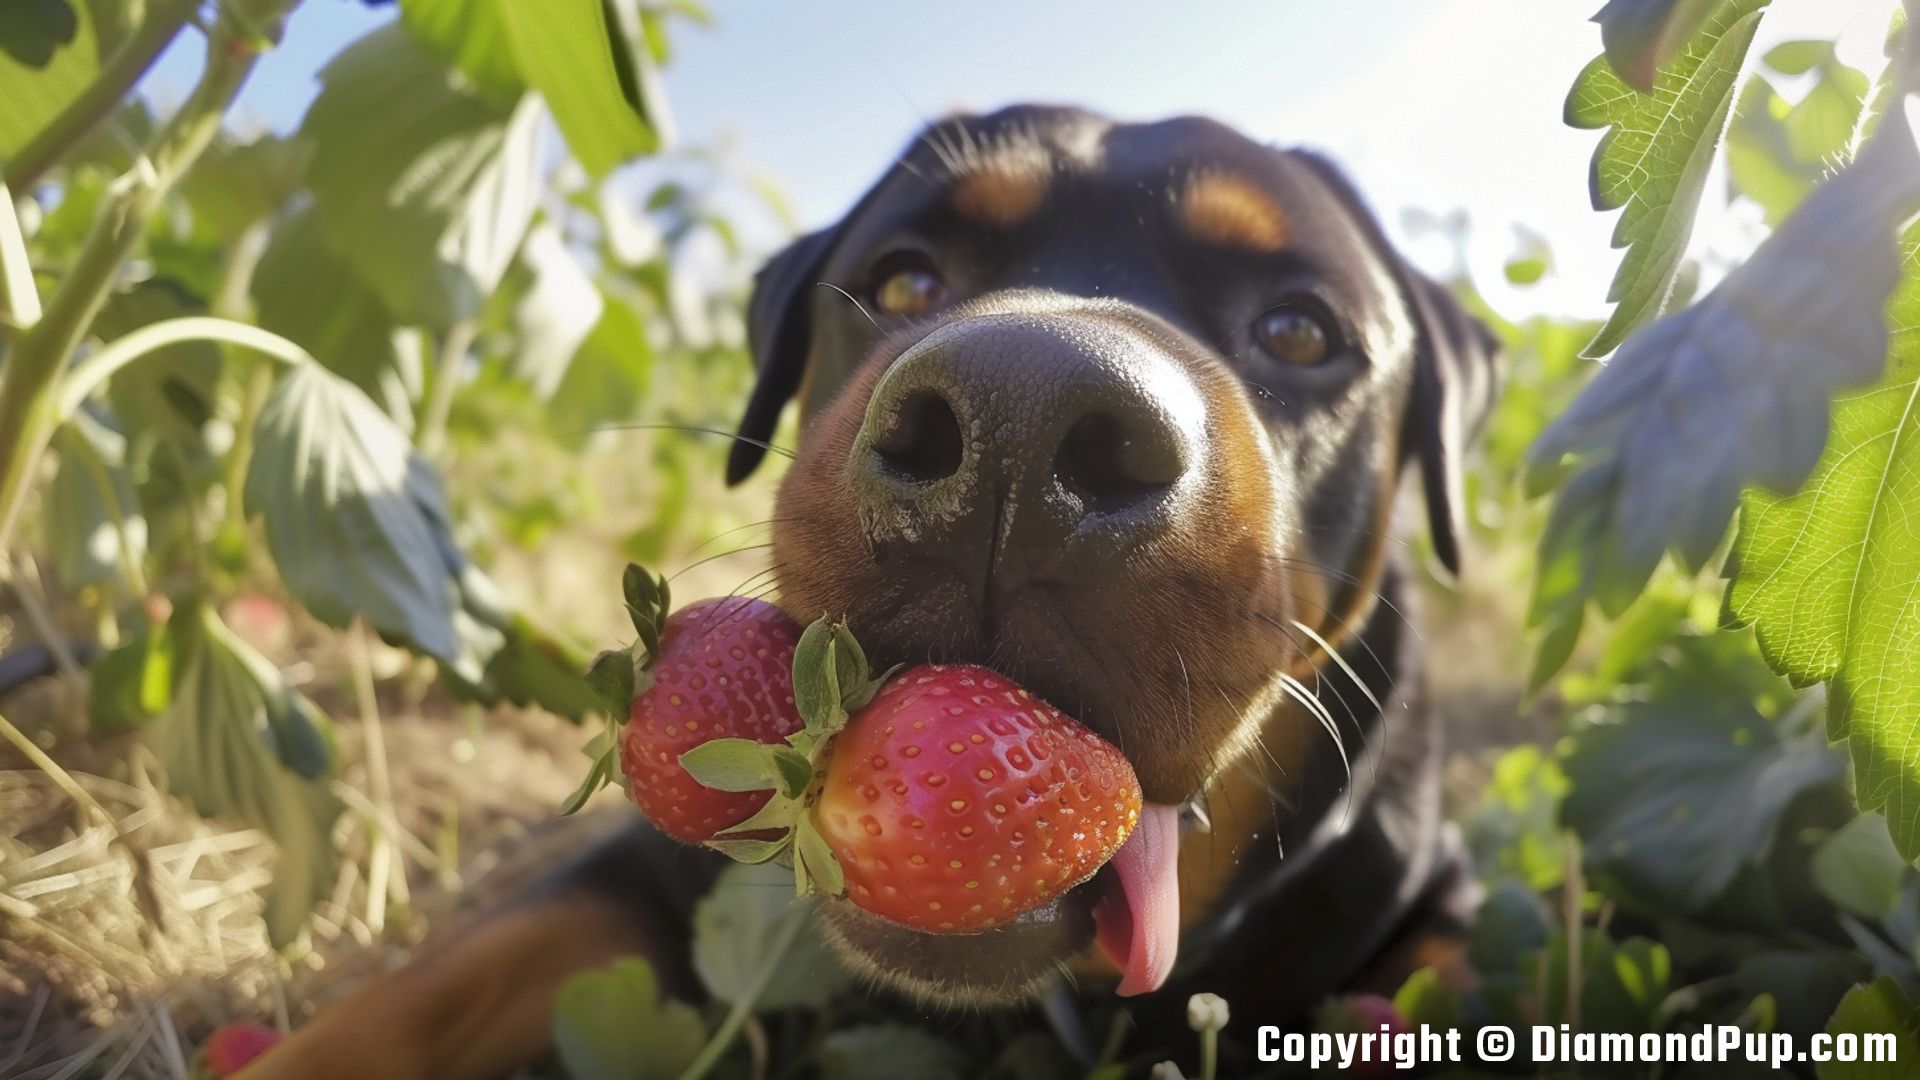 Photograph of a Cute Rottweiler Eating Strawberries